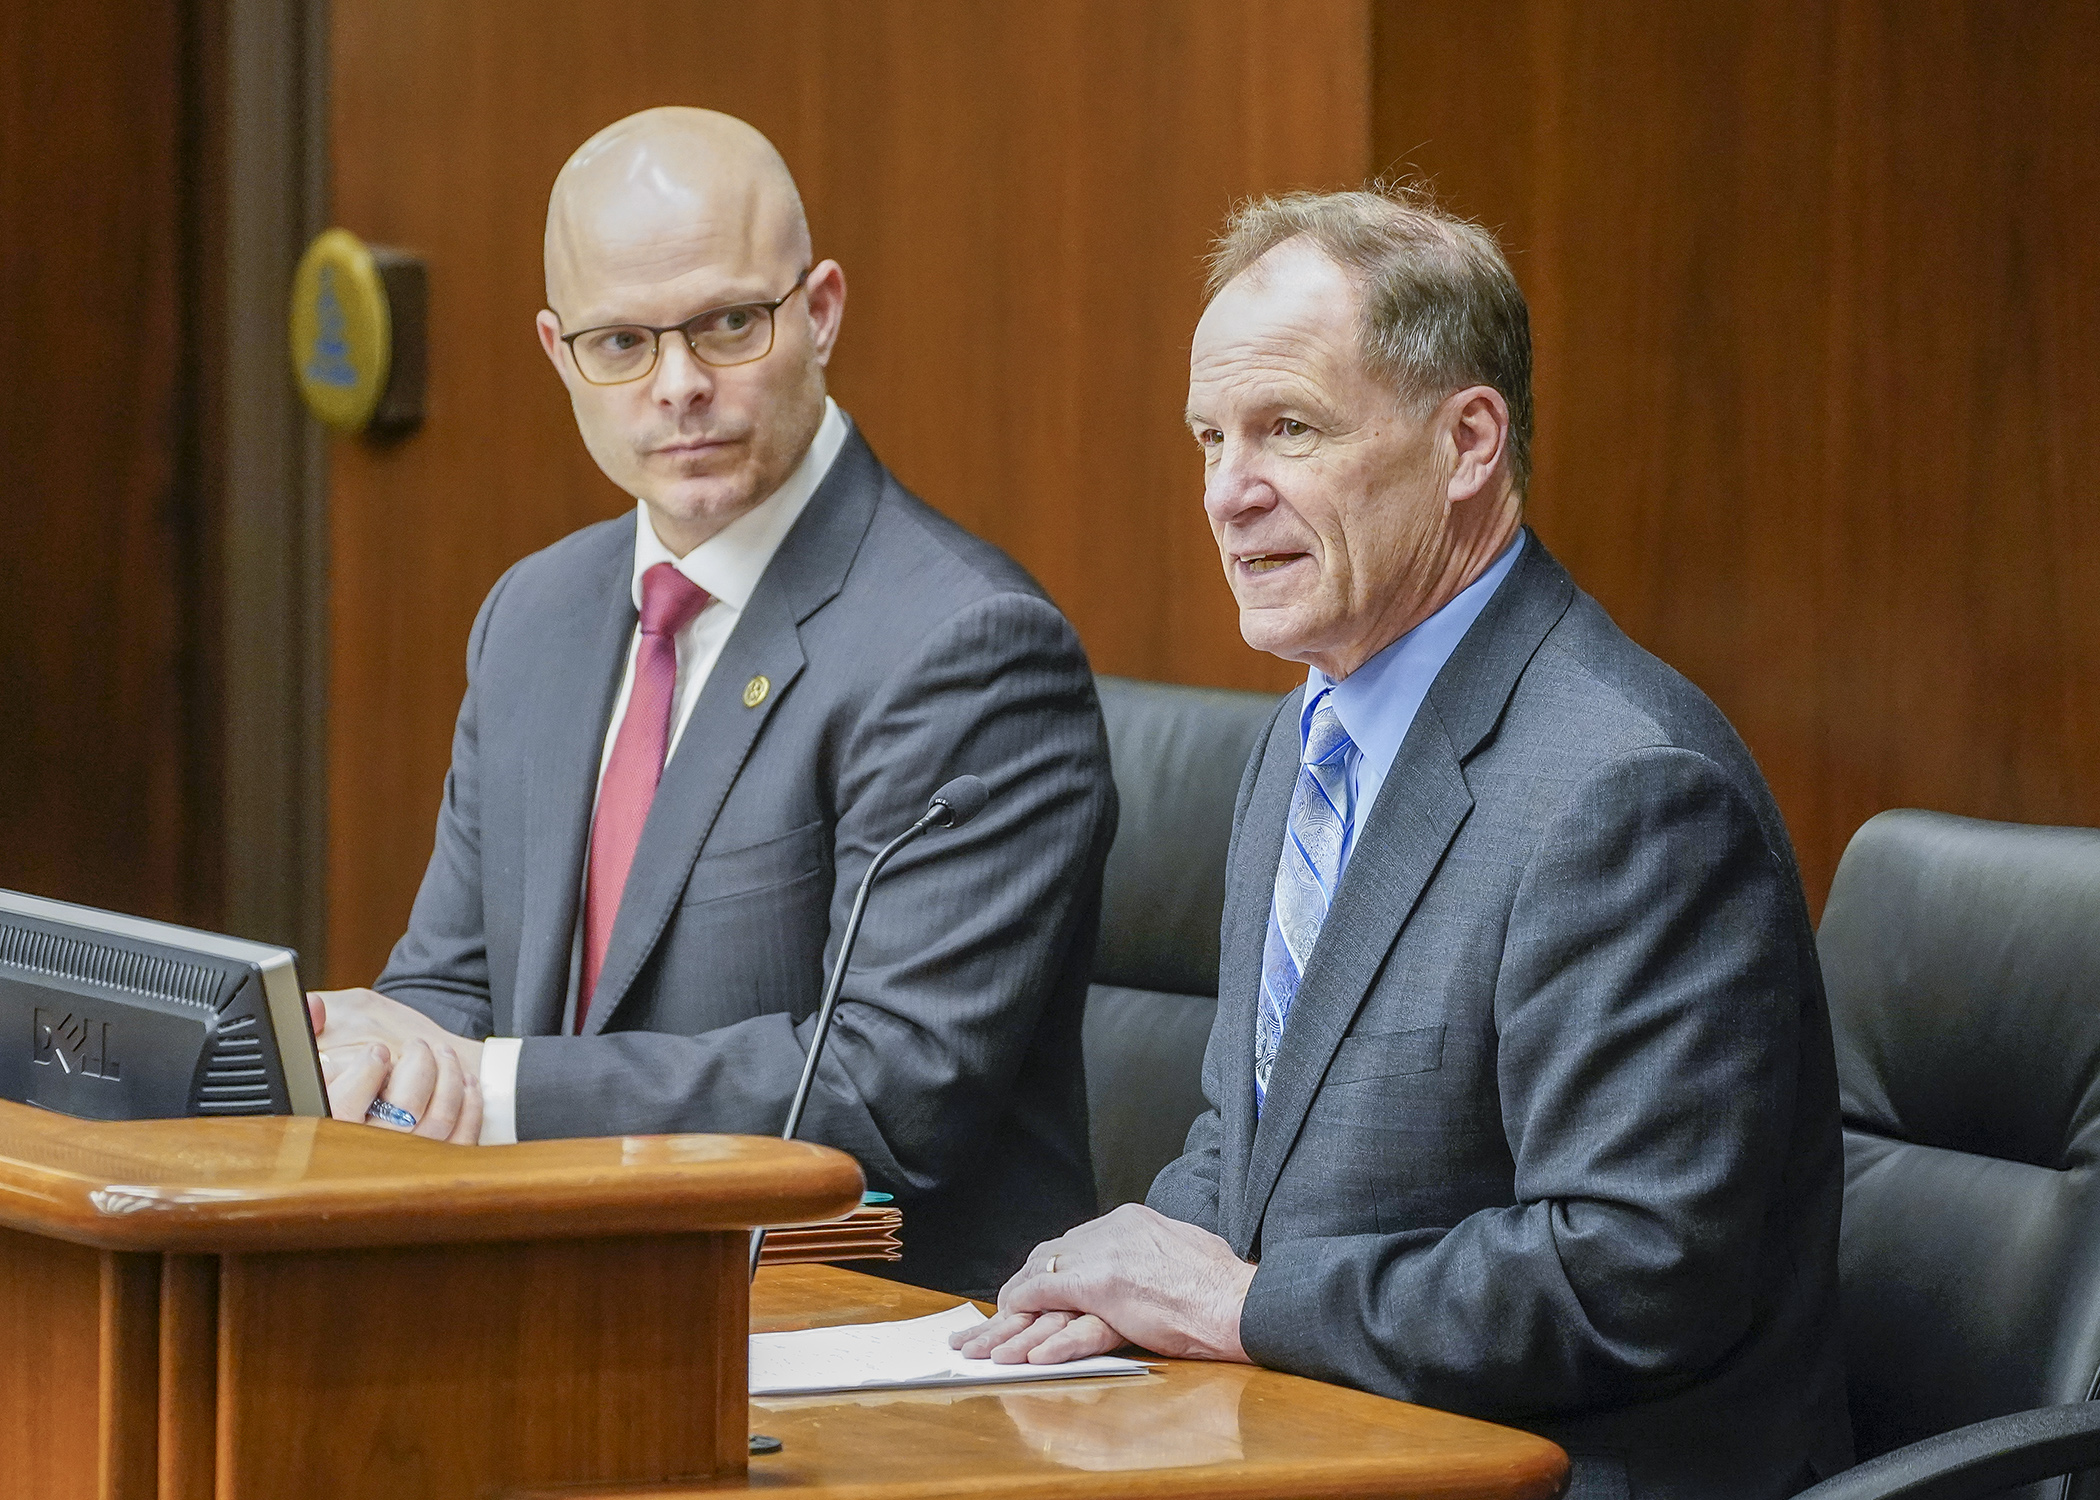 Revenue Commissioner Paul Marquart testifies March 22 during discussion of the House Property Tax Division’s report. Rep. Dave Lislegard, left, is the division chair. (Photo by Andrew VonBank)